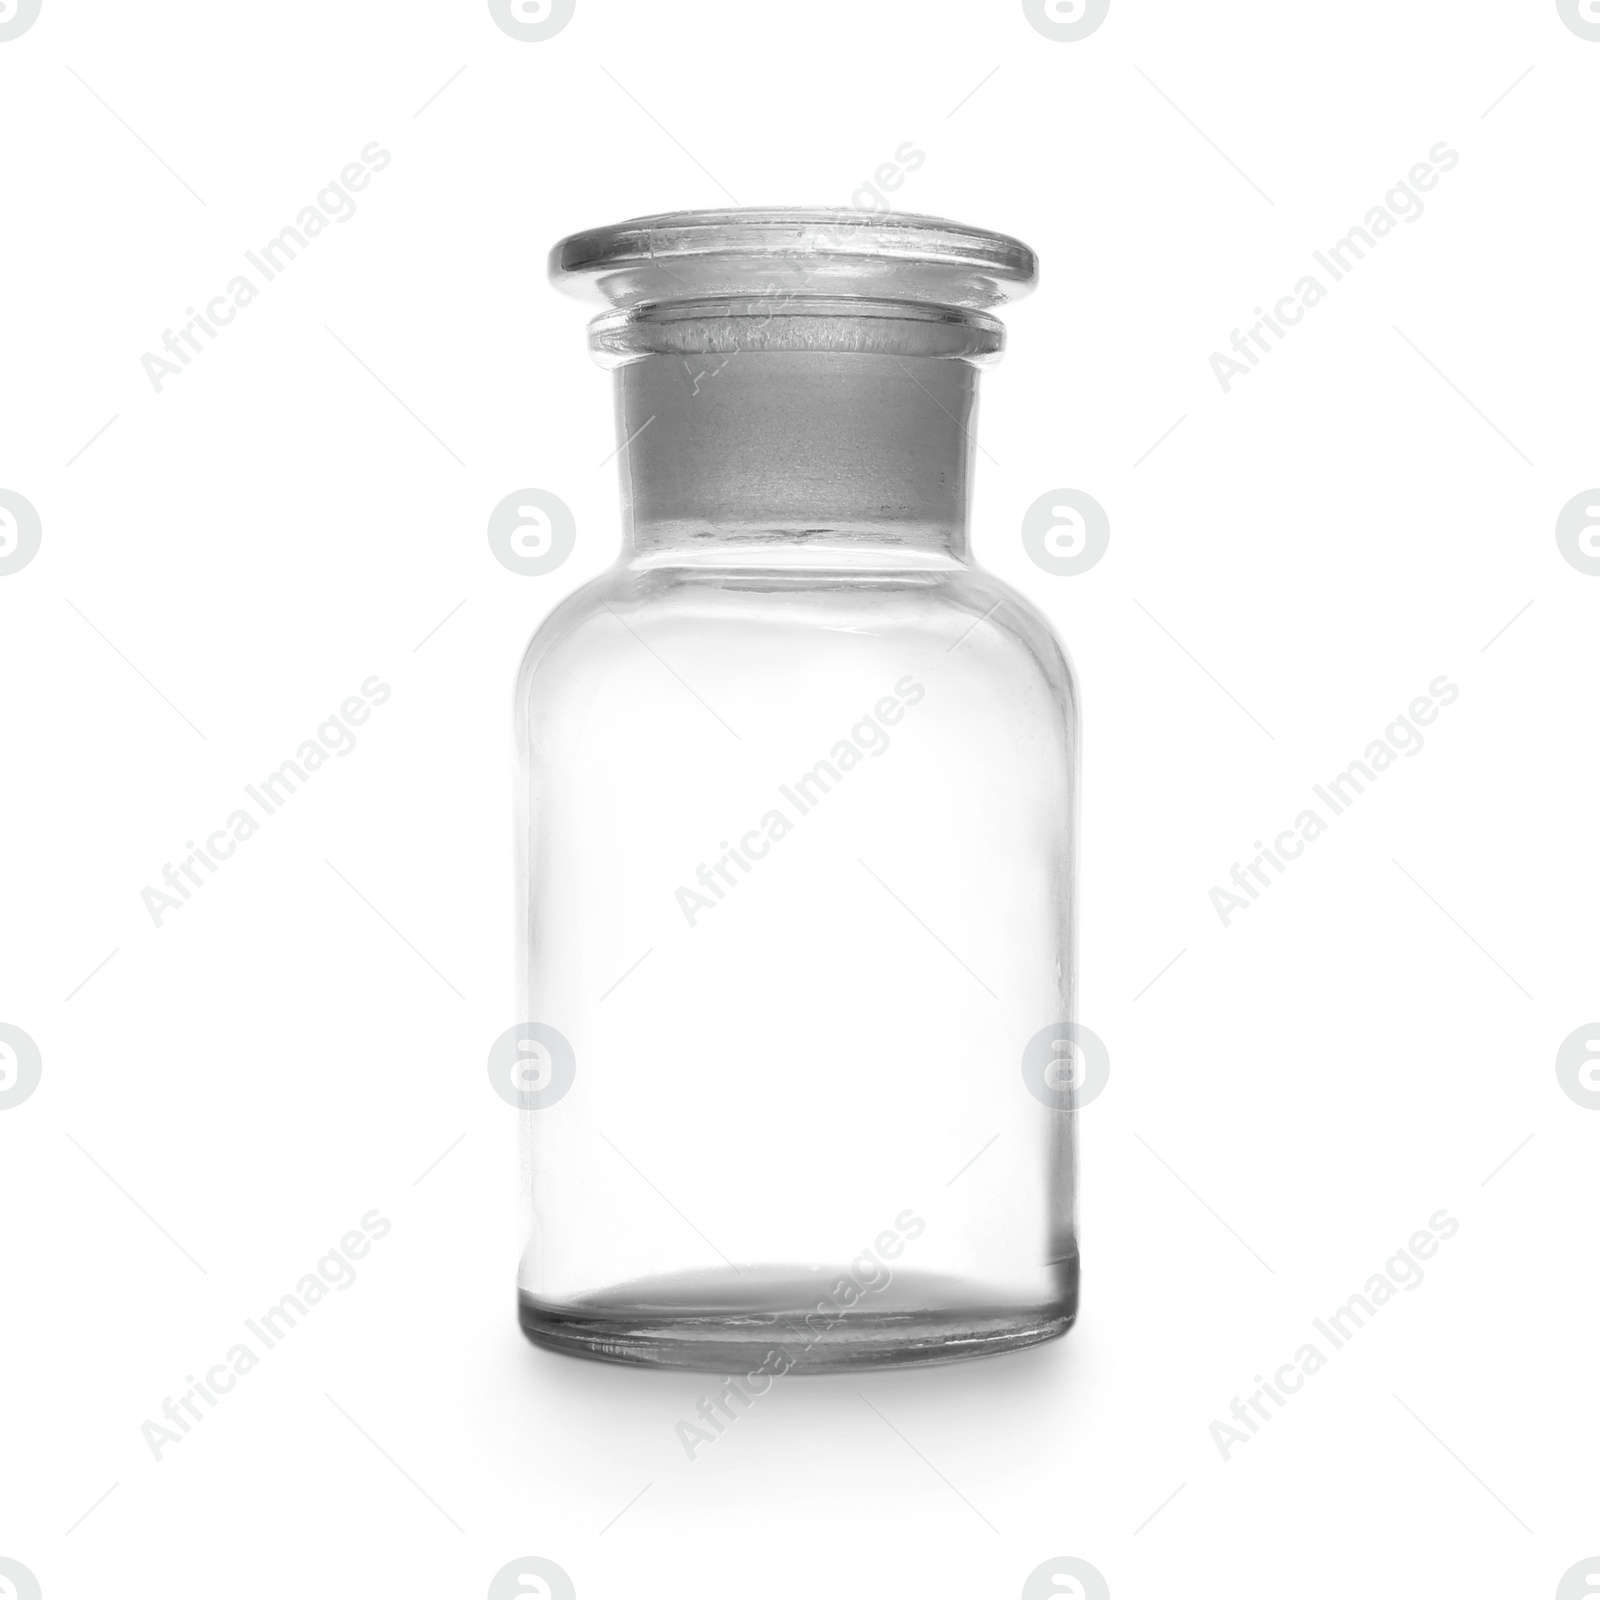 Photo of Empty apothecary bottle with stopper on white background. Laboratory glassware